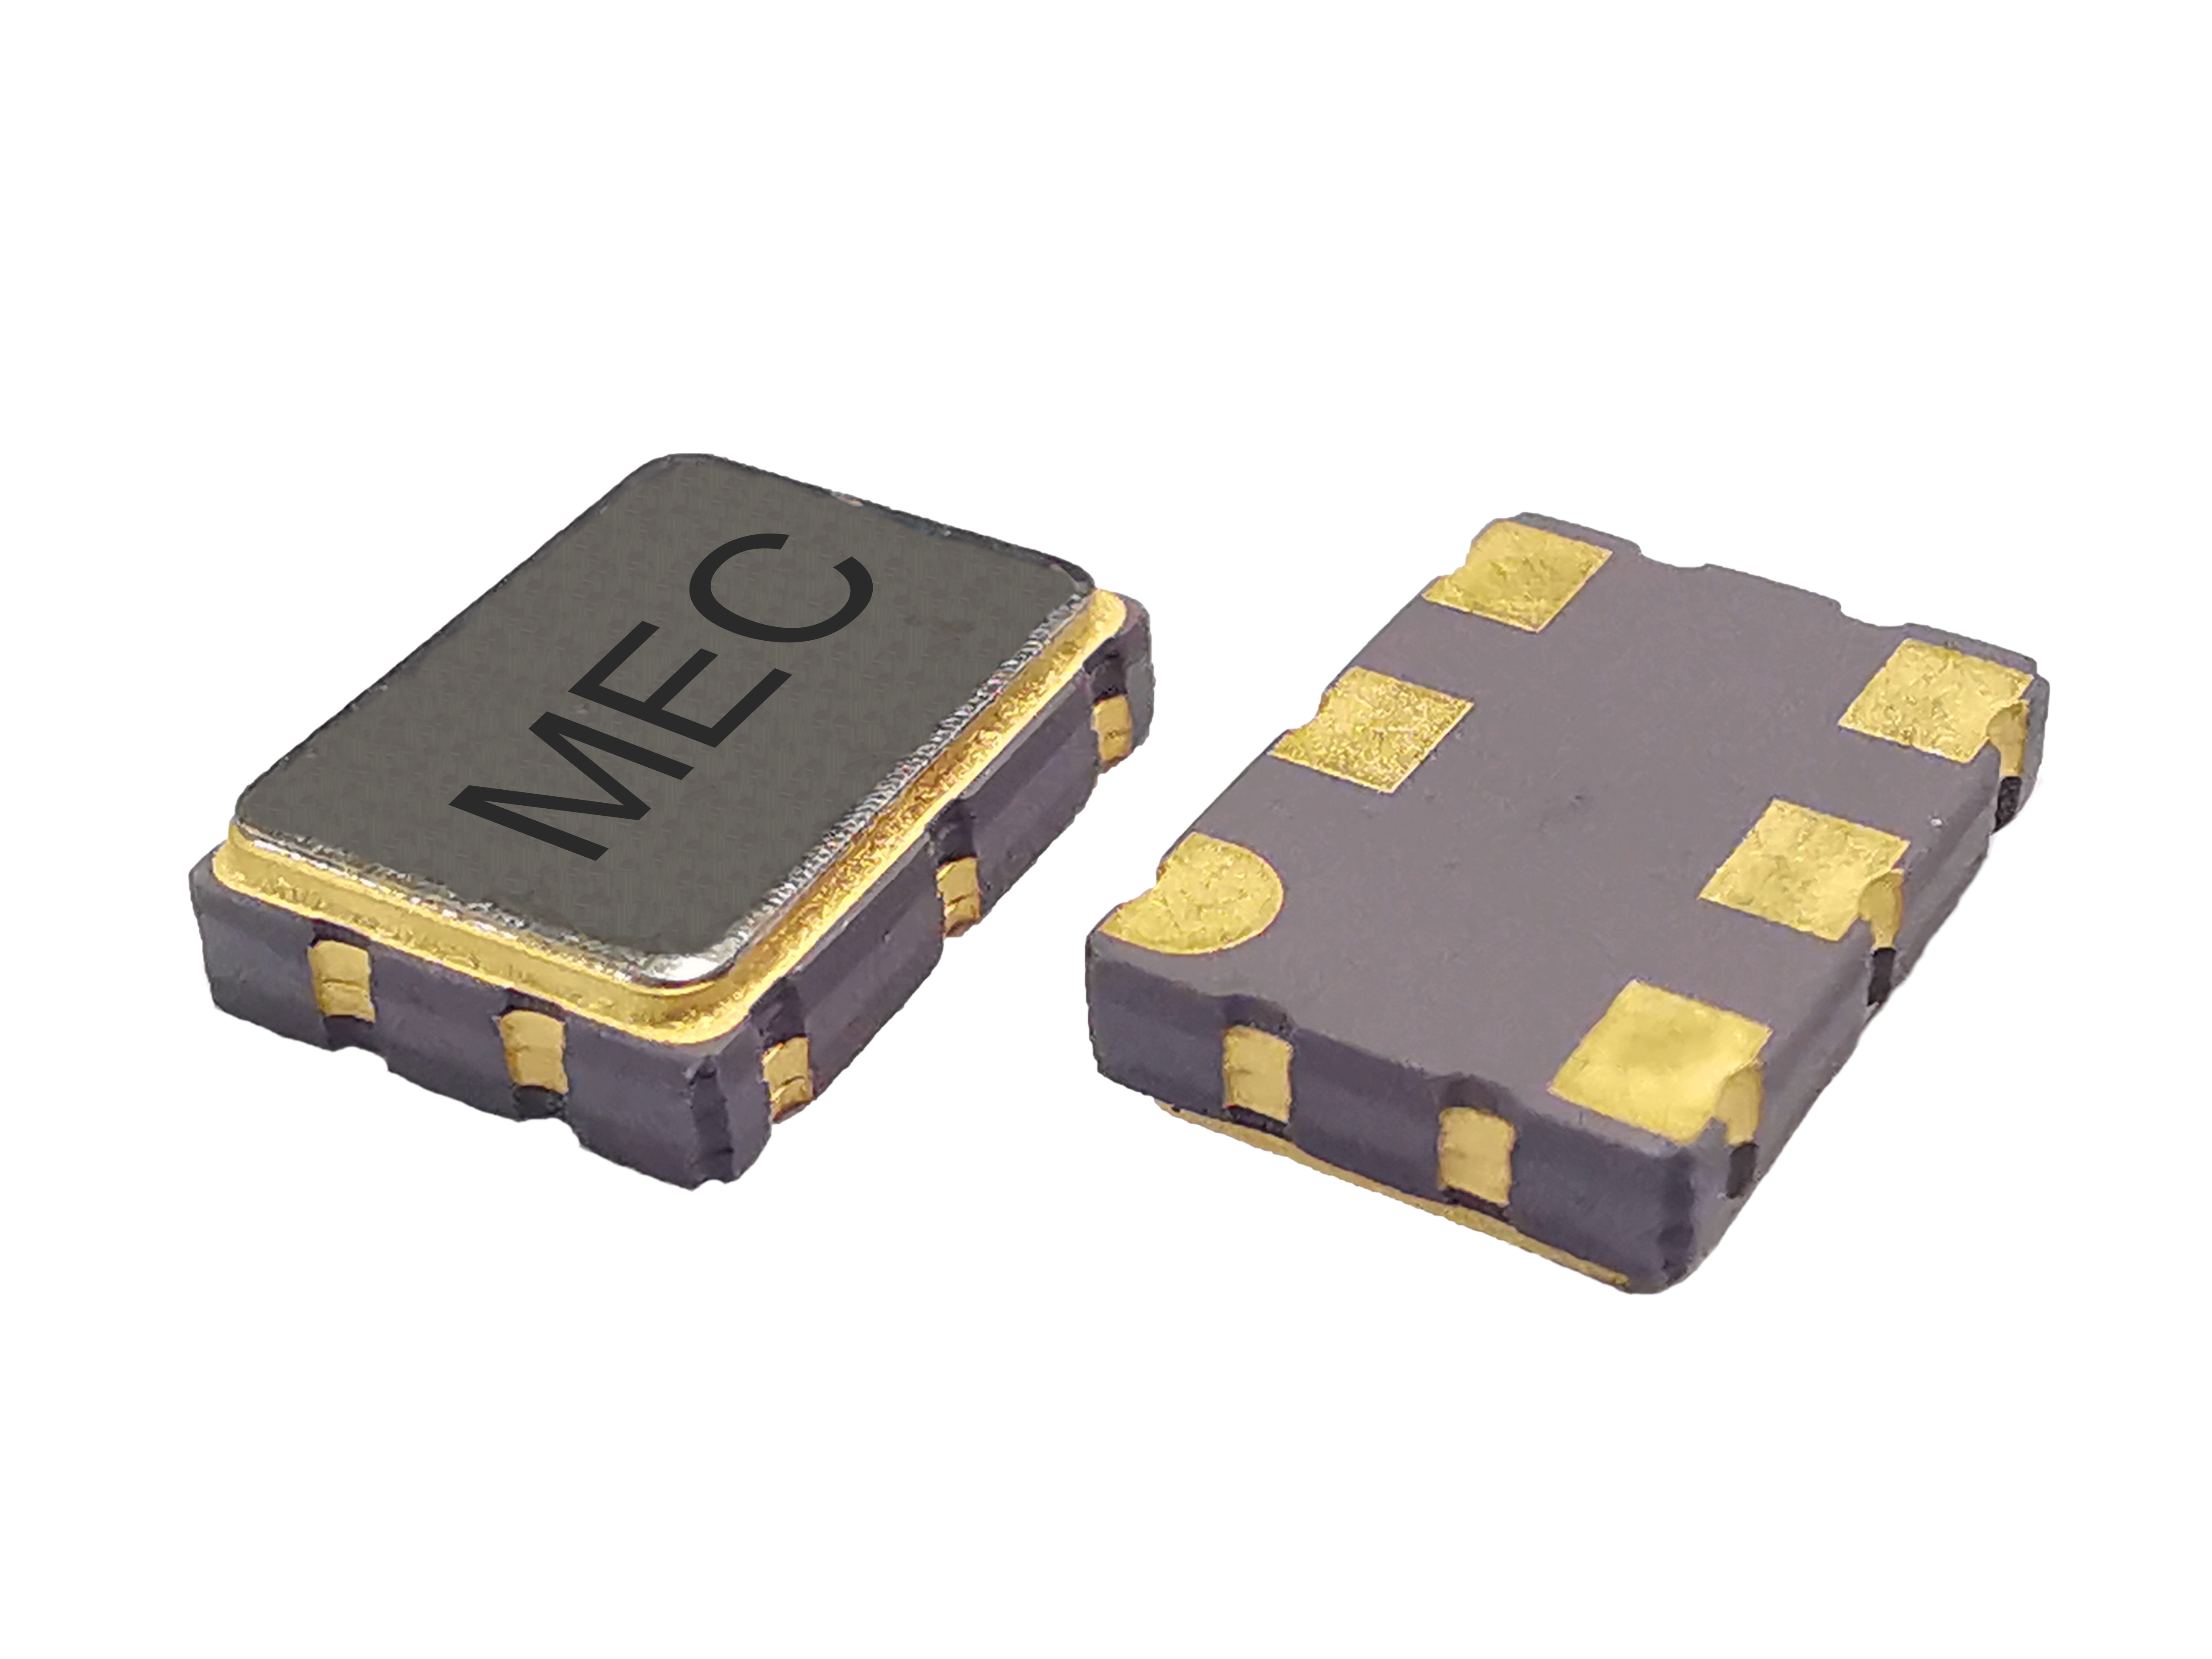 HCDQF576 7050 2.5V Quick-Turn Programmable Frequency Swithable Differential LVDS SMD Crystal Oscillator